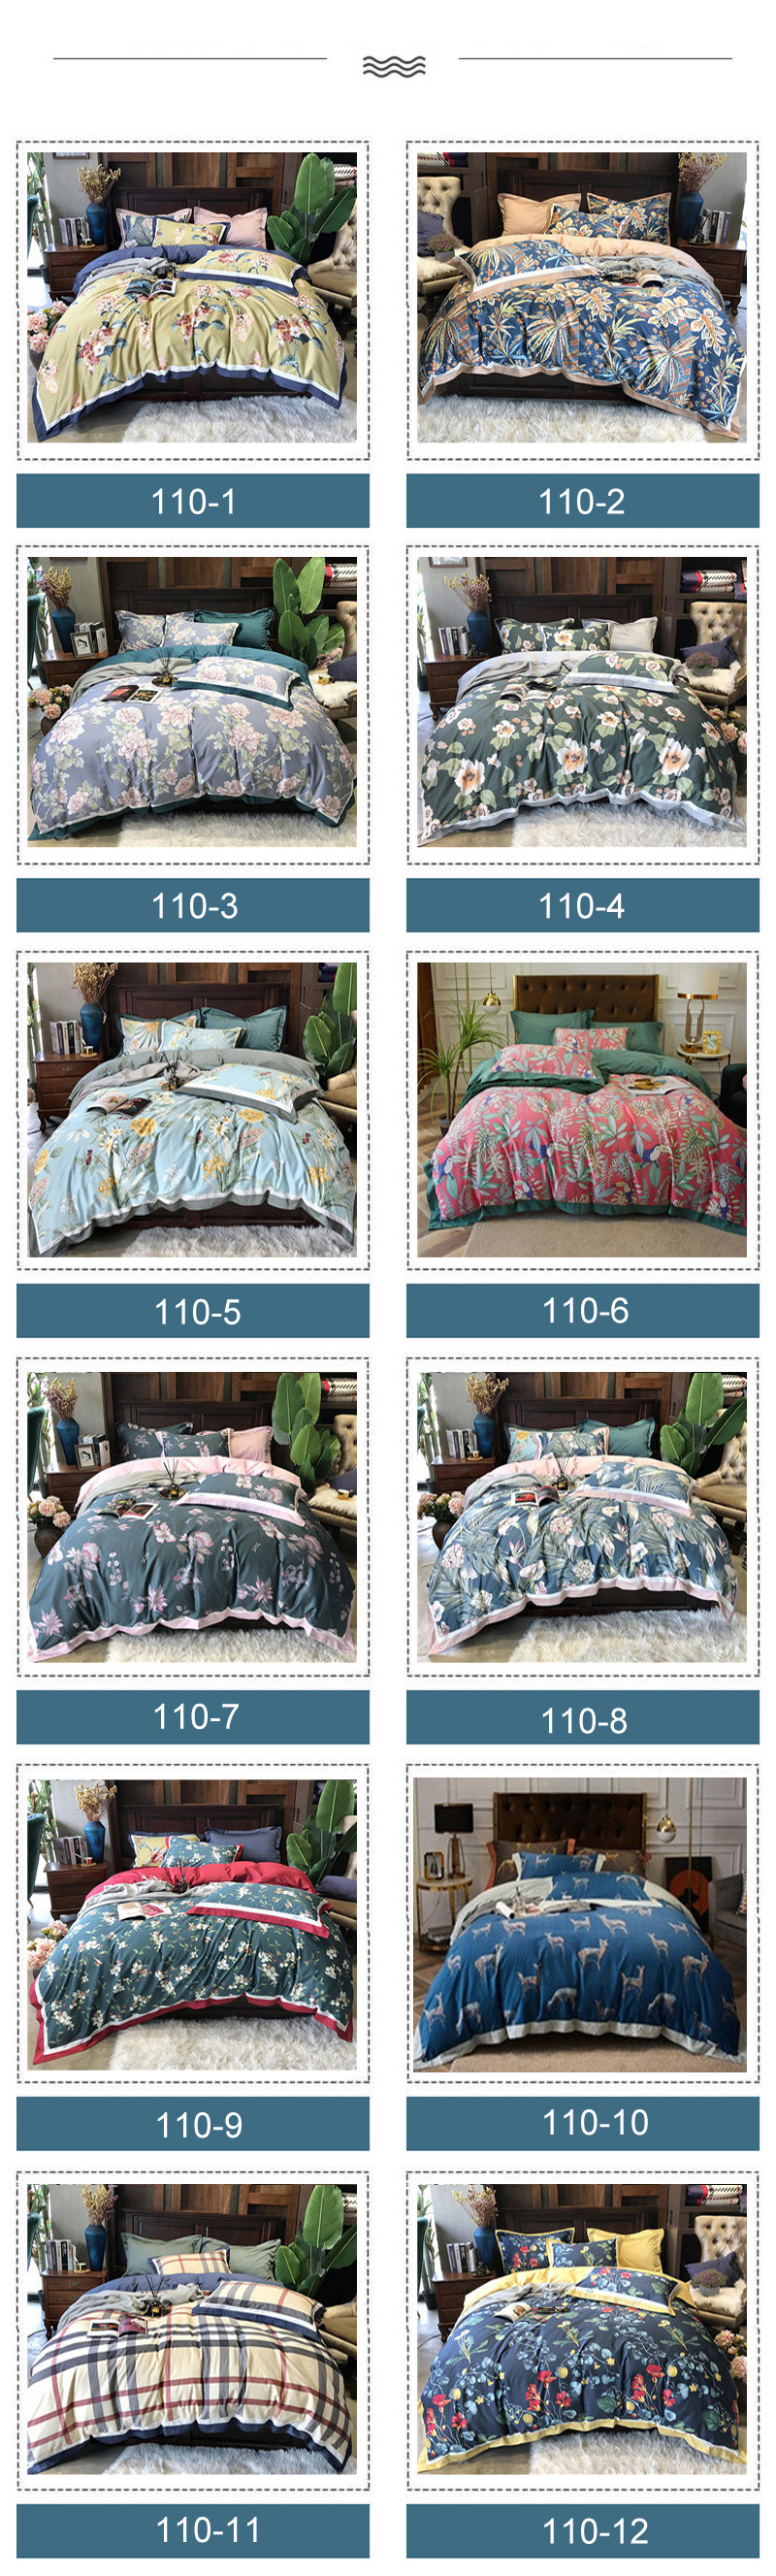 For Single 3PC Good quality Bedding